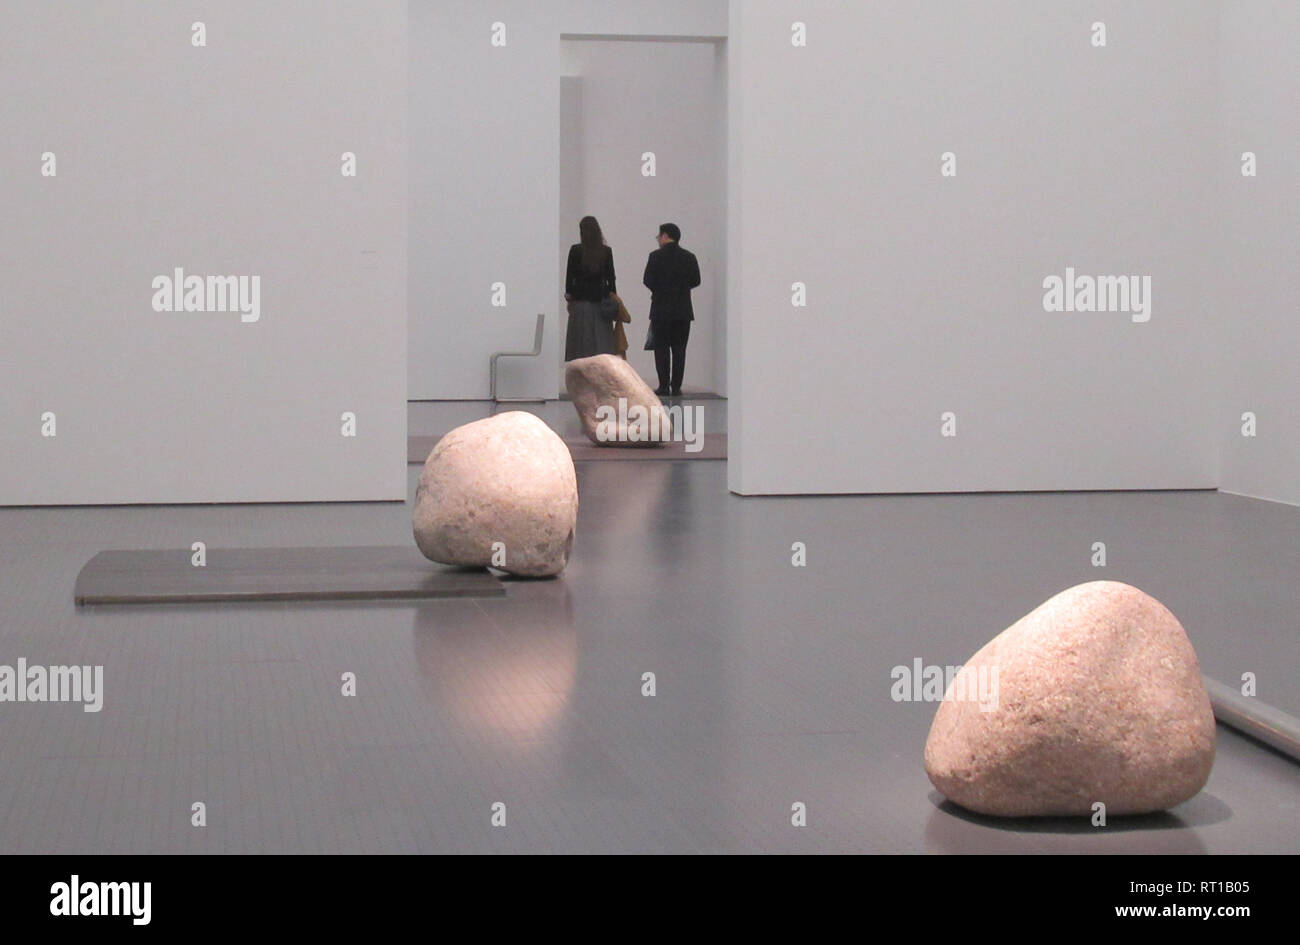 26 February 2019, France (France), Metz: View of Lee Ufan's installations 'Relatum/Dialogue' in the exhibition 'Habiter le temps' at the Centre Pompidou. Ufan, who studied philosophy in Japan after completing his art degree, uses his art to seek a new arrangement of already existing things by relating them to the surrounding space. (to dpa 'Metz dedicates star artist Lee Ufan retrospective: The art of silence' from 27.02.2019) Photo: Sabine Glaubitz/dpa Stock Photo